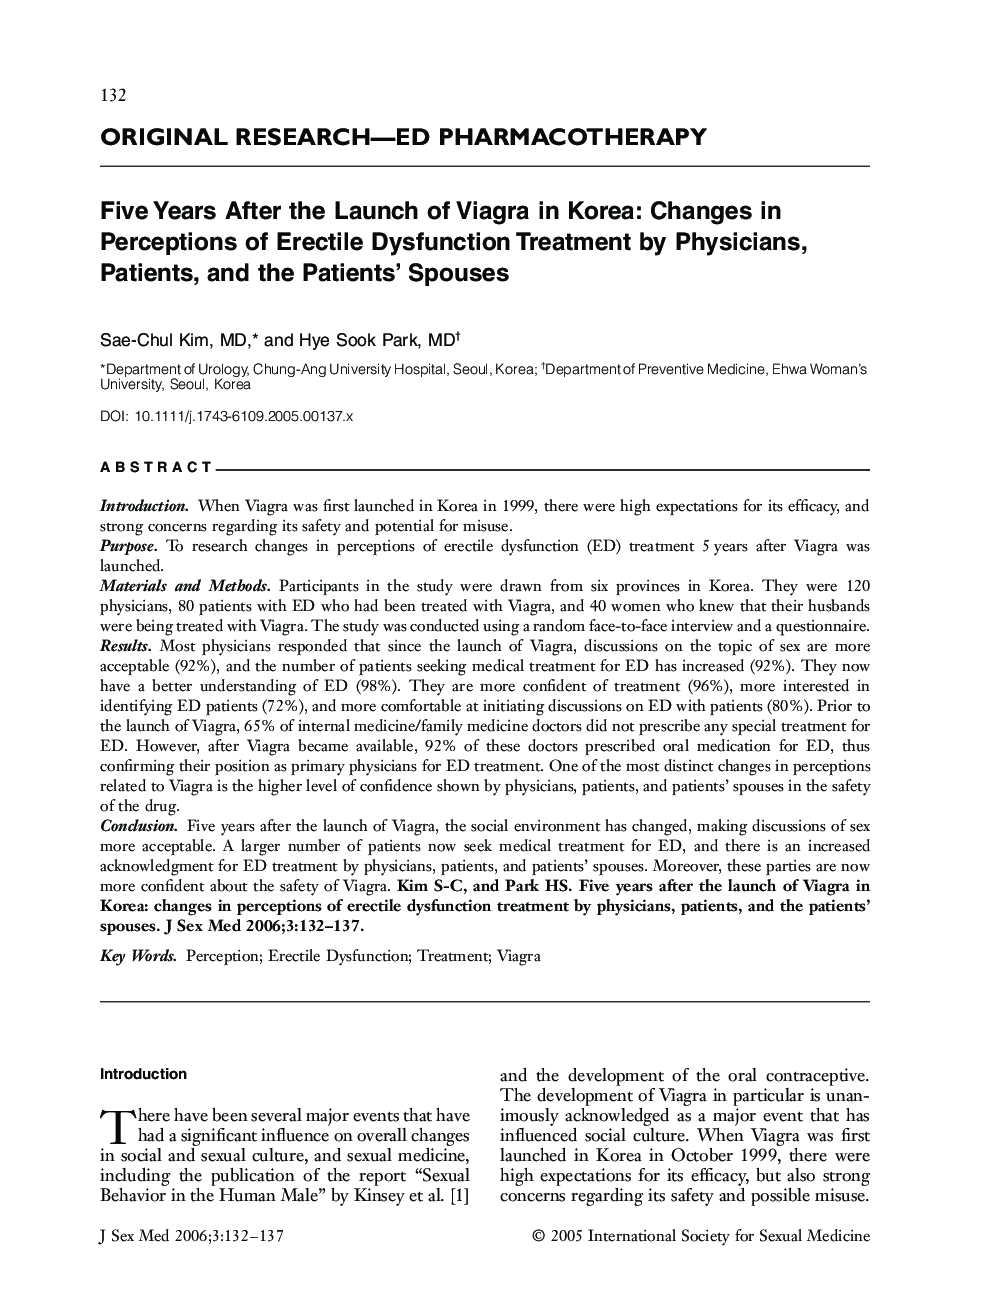 ORIGINAL RESEARCH-ED PHARMACOTHERAPY: Five Years After the Launch of Viagra in Korea: Changes in Perceptions of Erectile Dysfunction Treatment by Physicians, Patients, and the Patients' Spouses